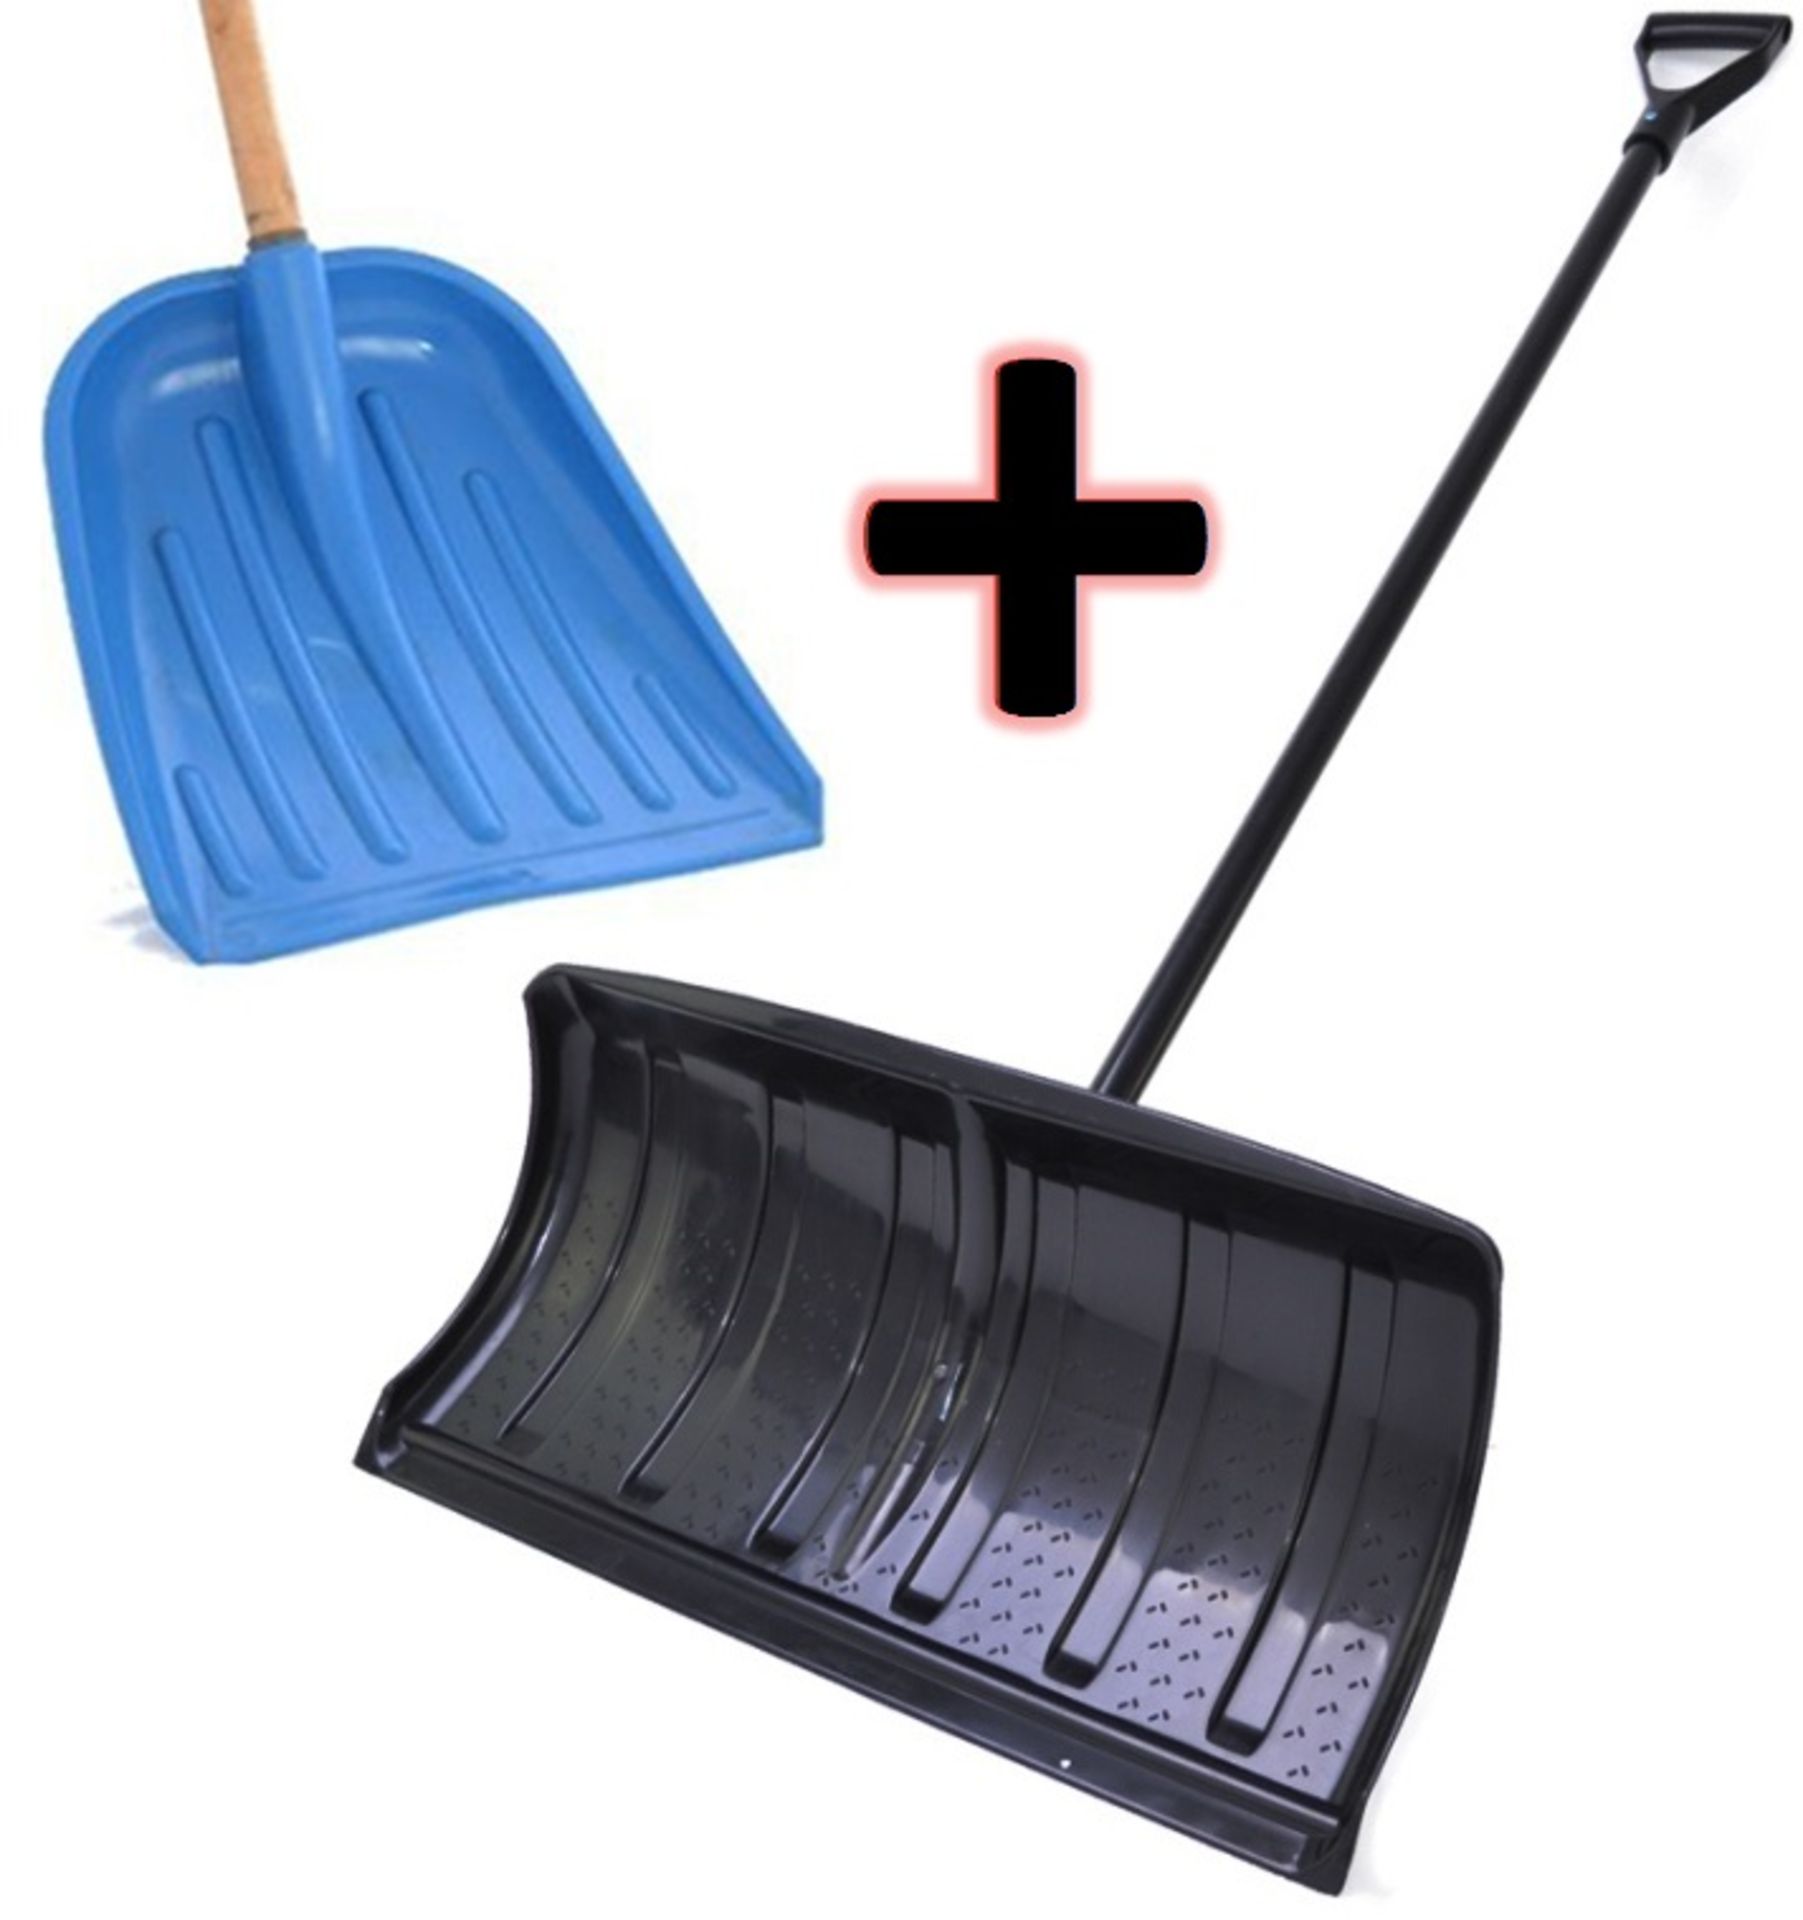 2x pcs Shovels - Spade Scoop + Wide Plough to Clear Driveway in Minutes ( JUST KEEP PUSHING AWAY ) -